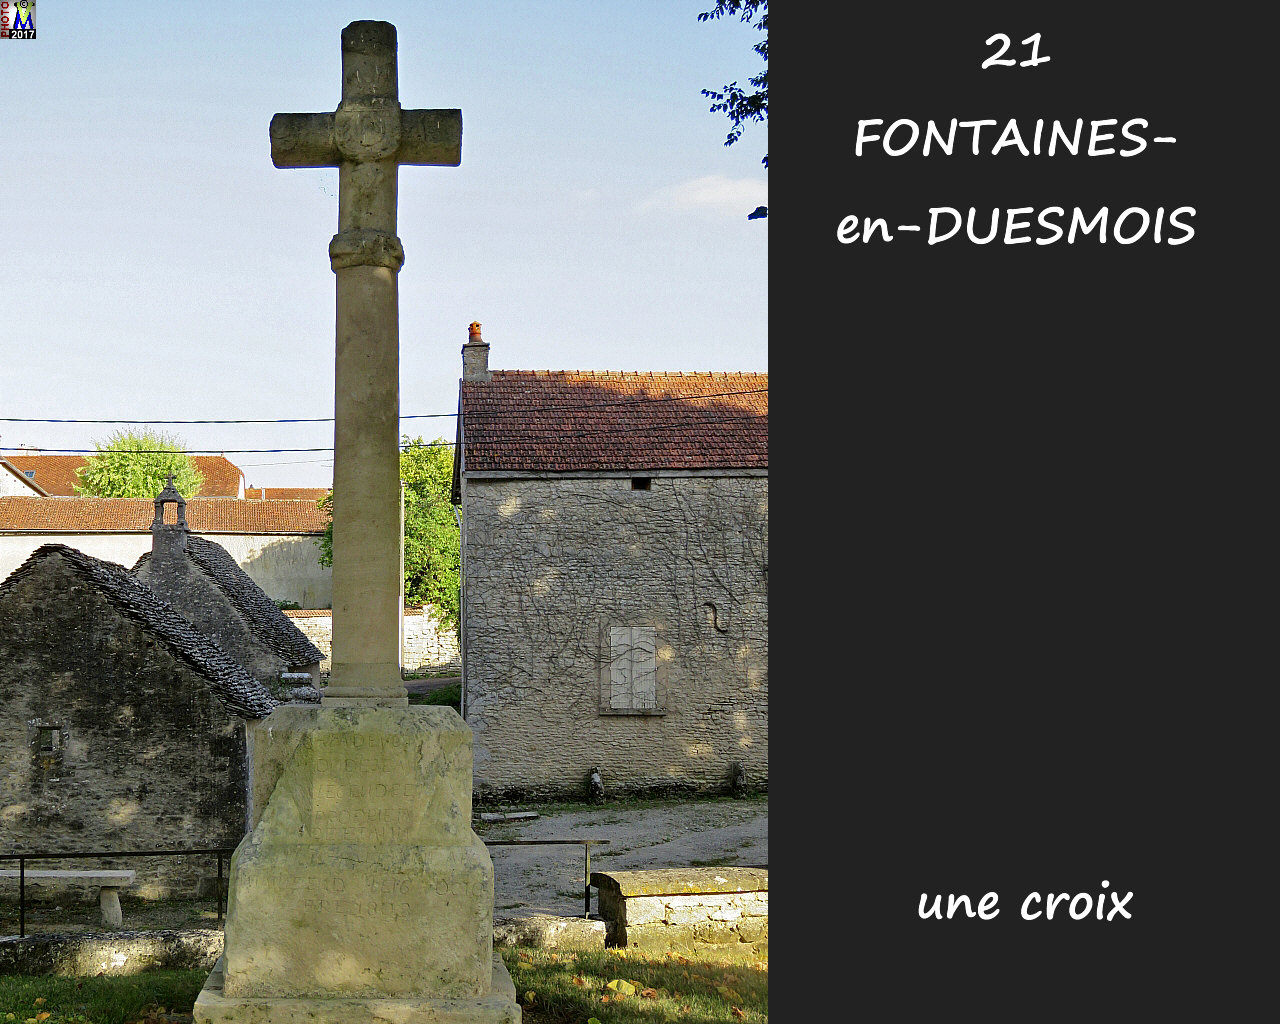 21FONTAINES-DUESMOIS_croix_110.jpg